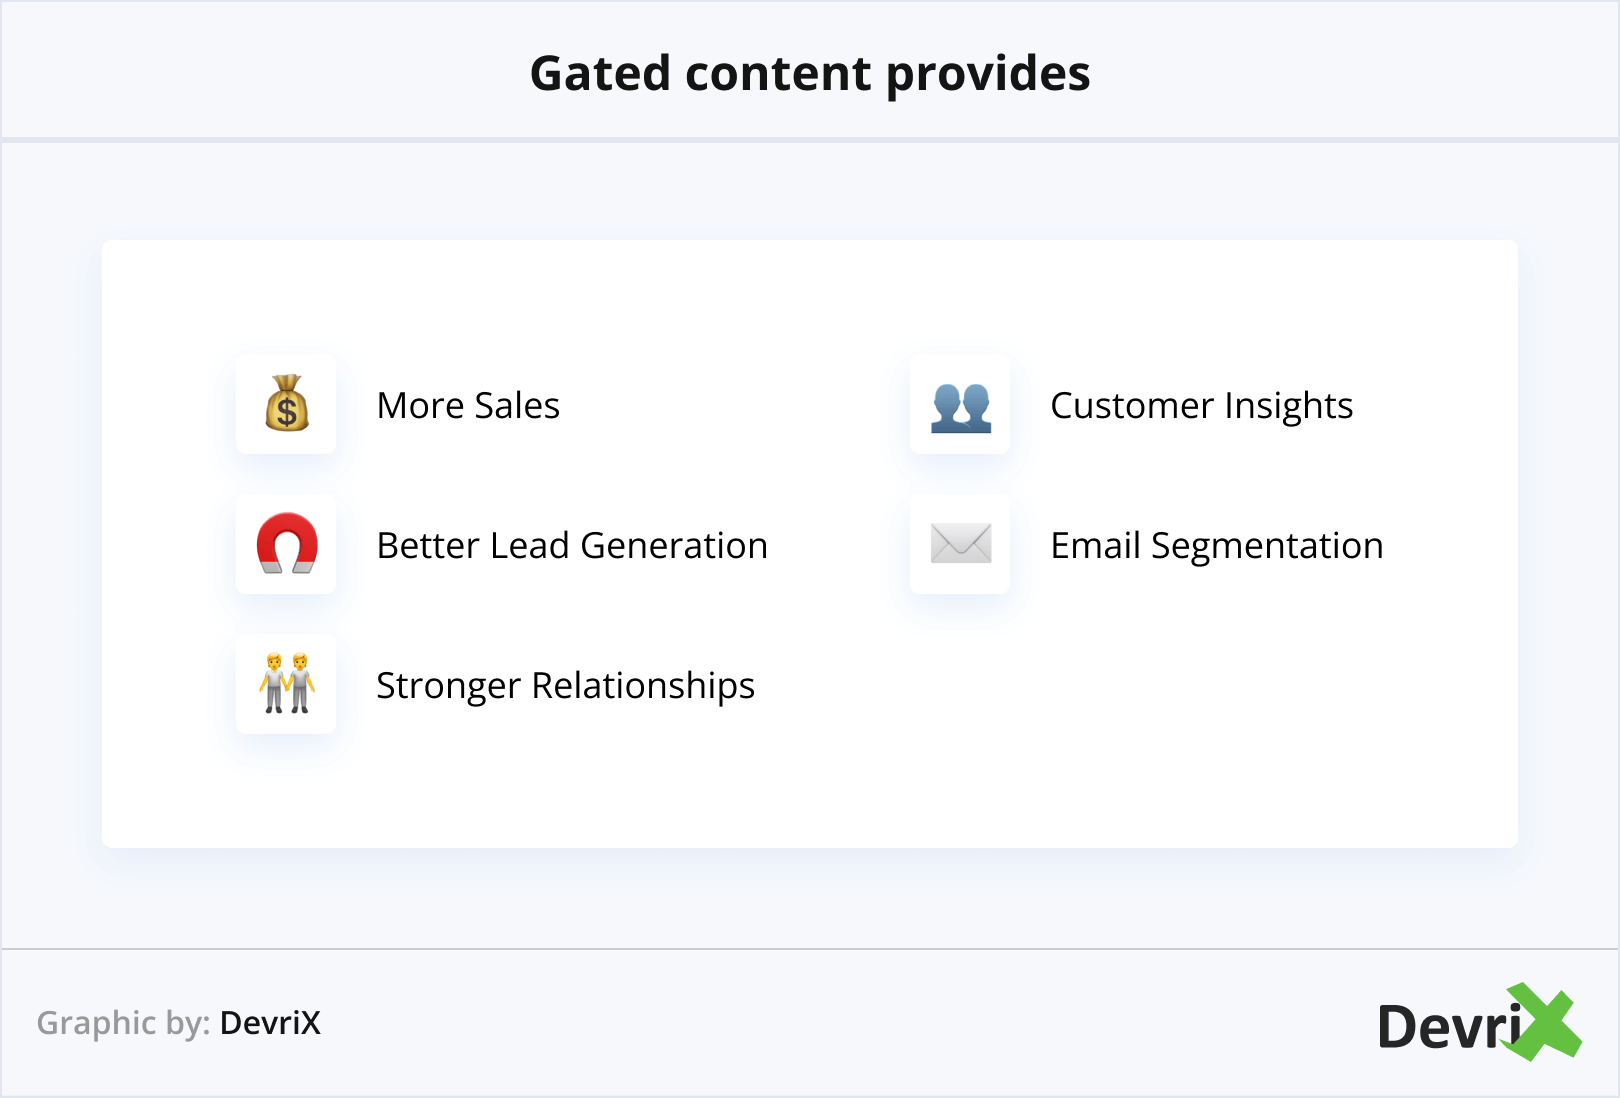 Gated content provides